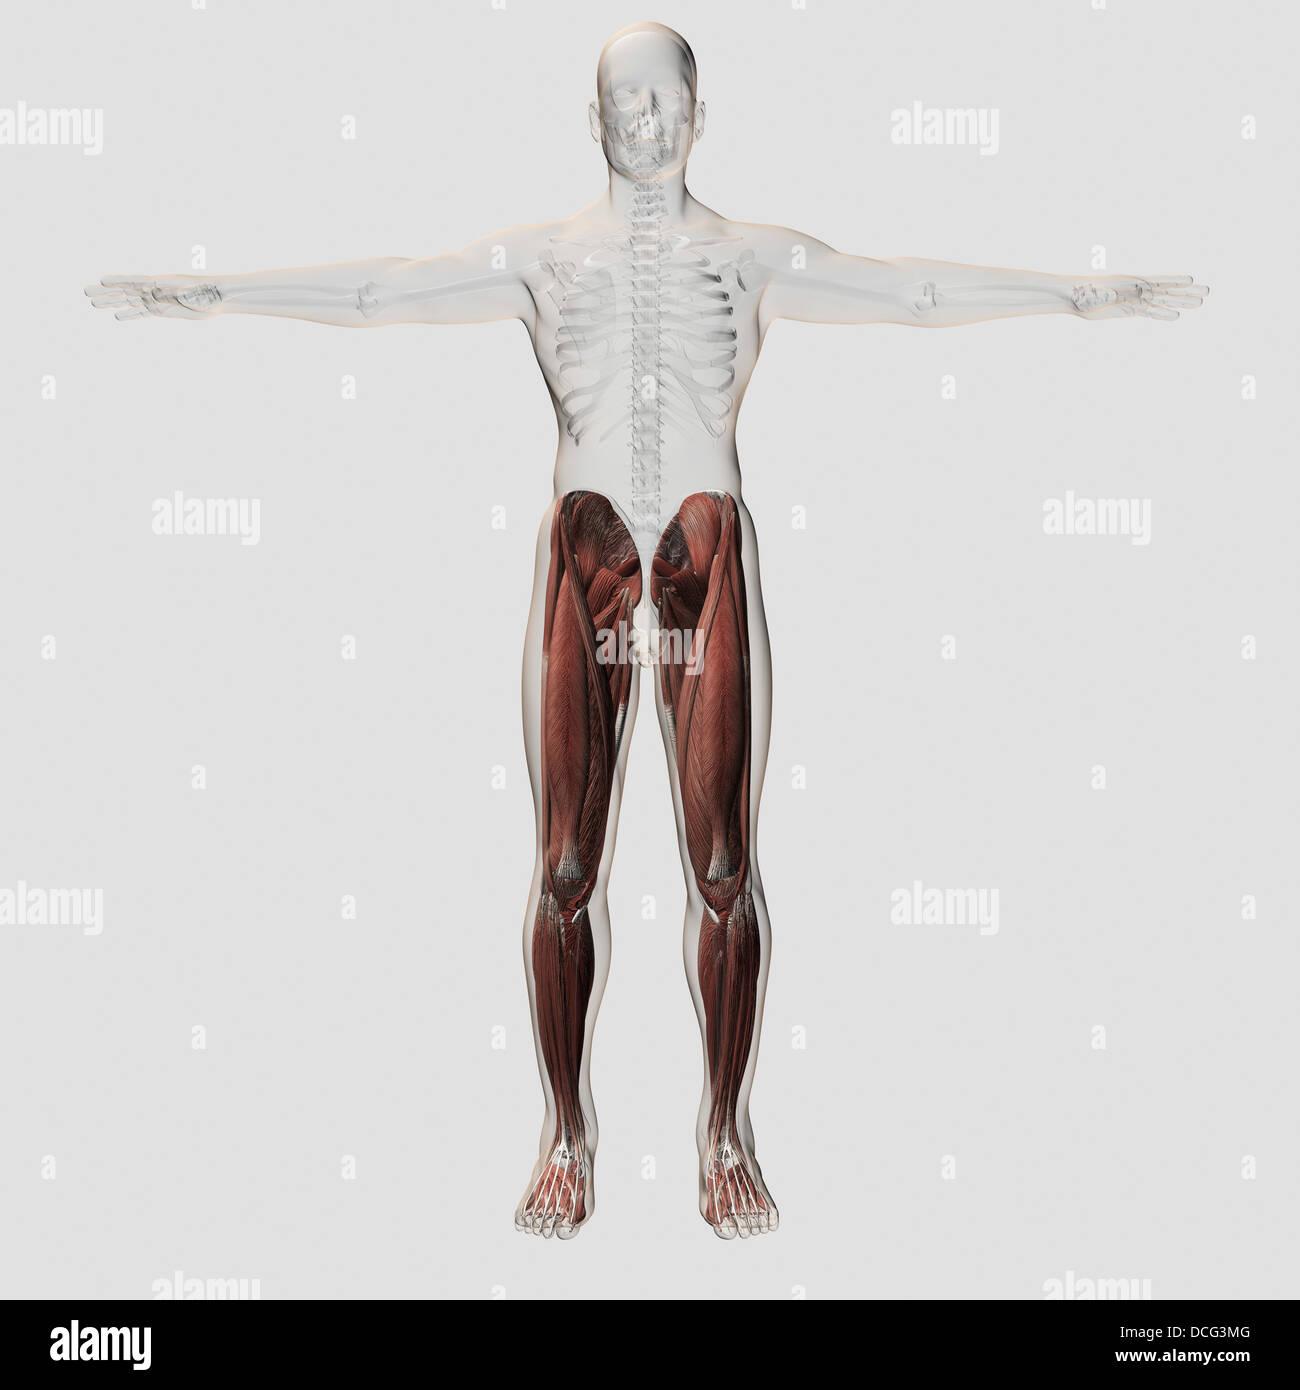 Male muscle anatomy of the human legs, anterior view. Stock Photo